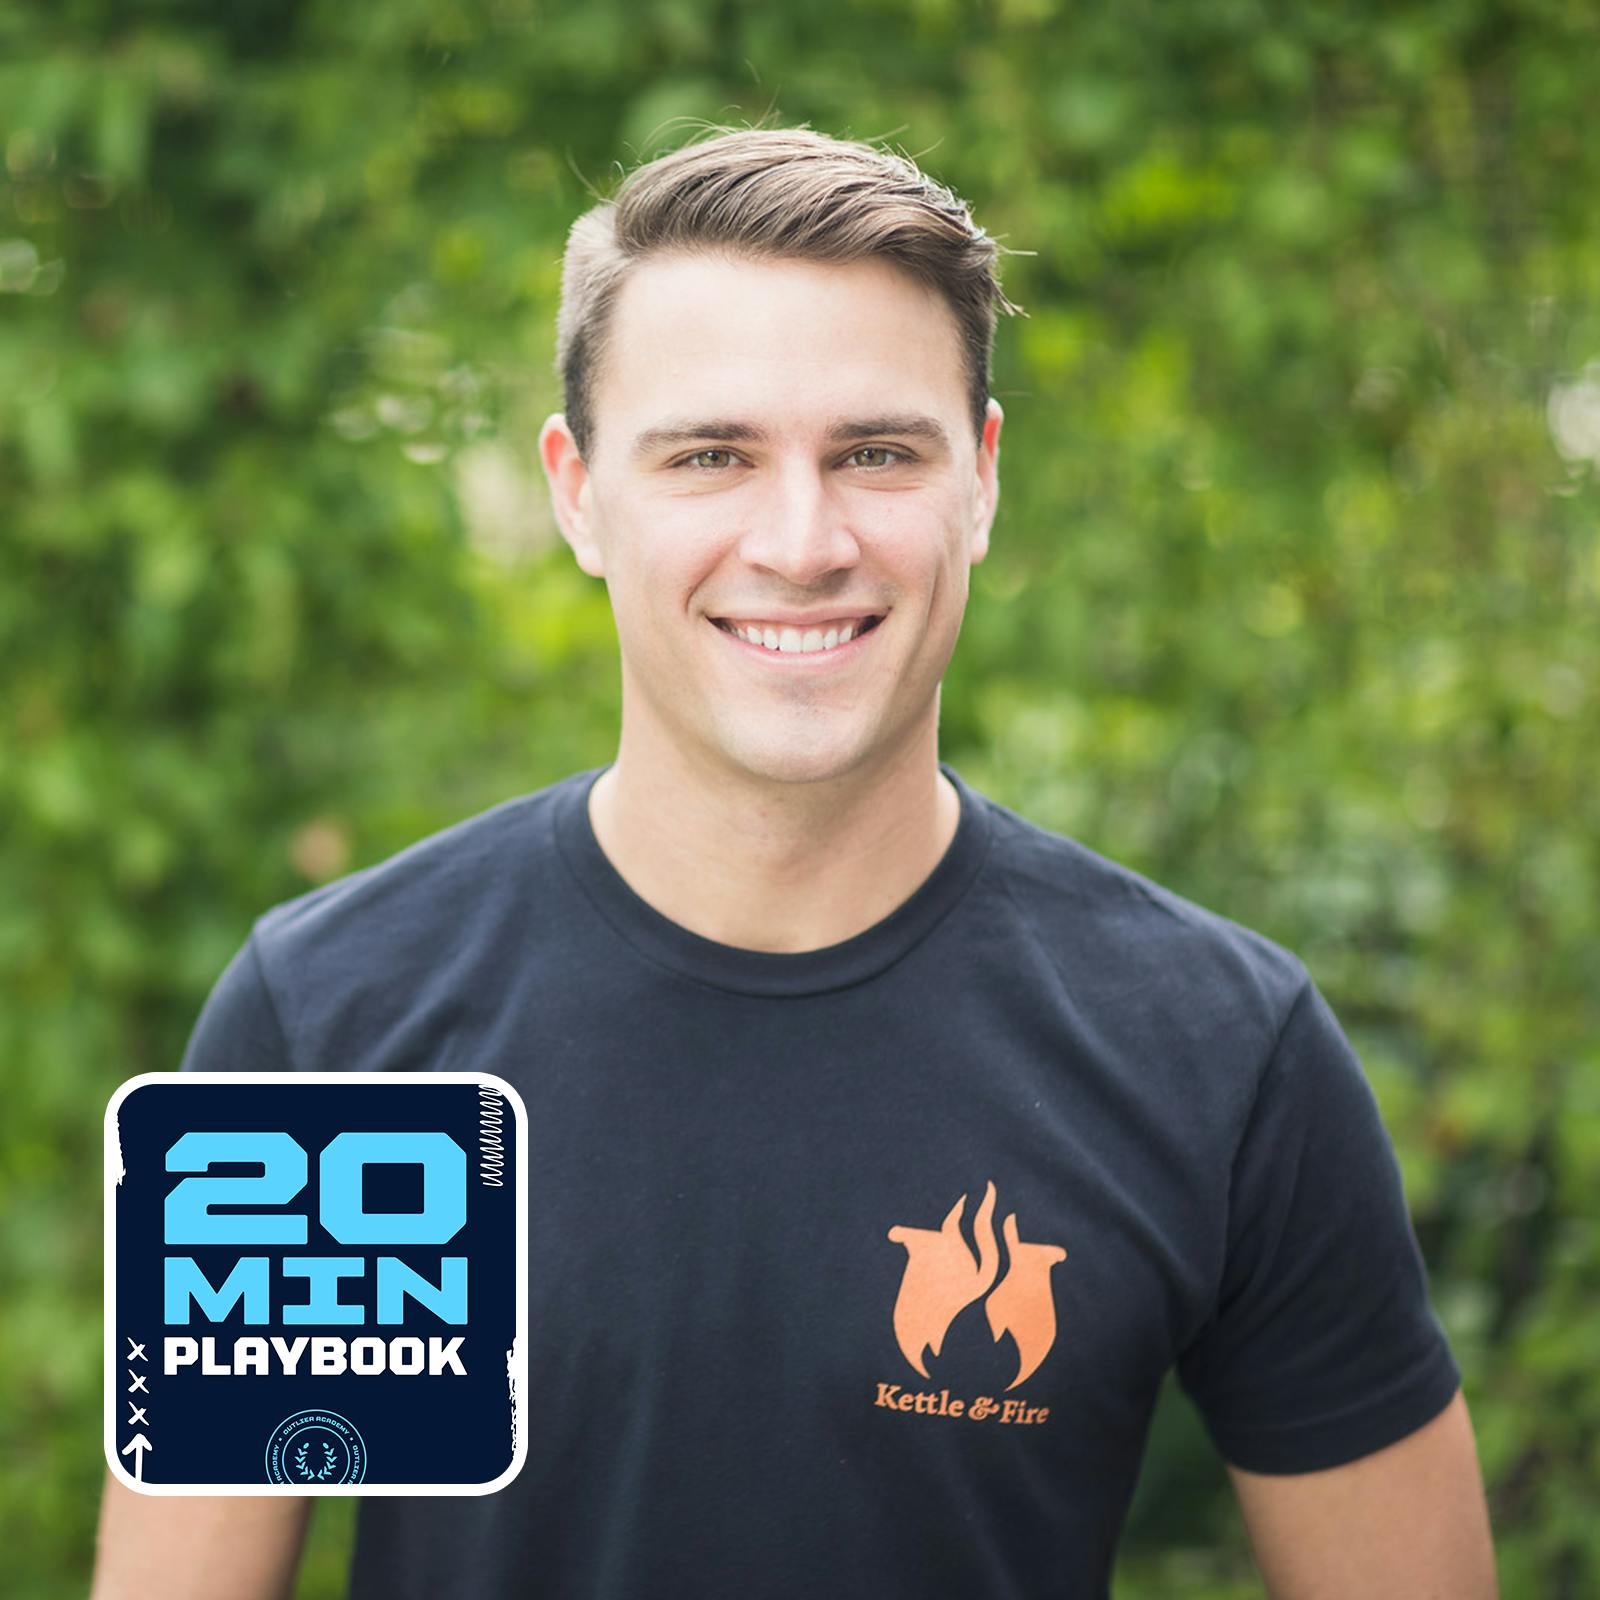 #143 Kettle & Fire’s Justin Mares | Identifying Trends, 5-Minute Mini Workouts, 6 To Dos Per Day, Favorite Books, and More